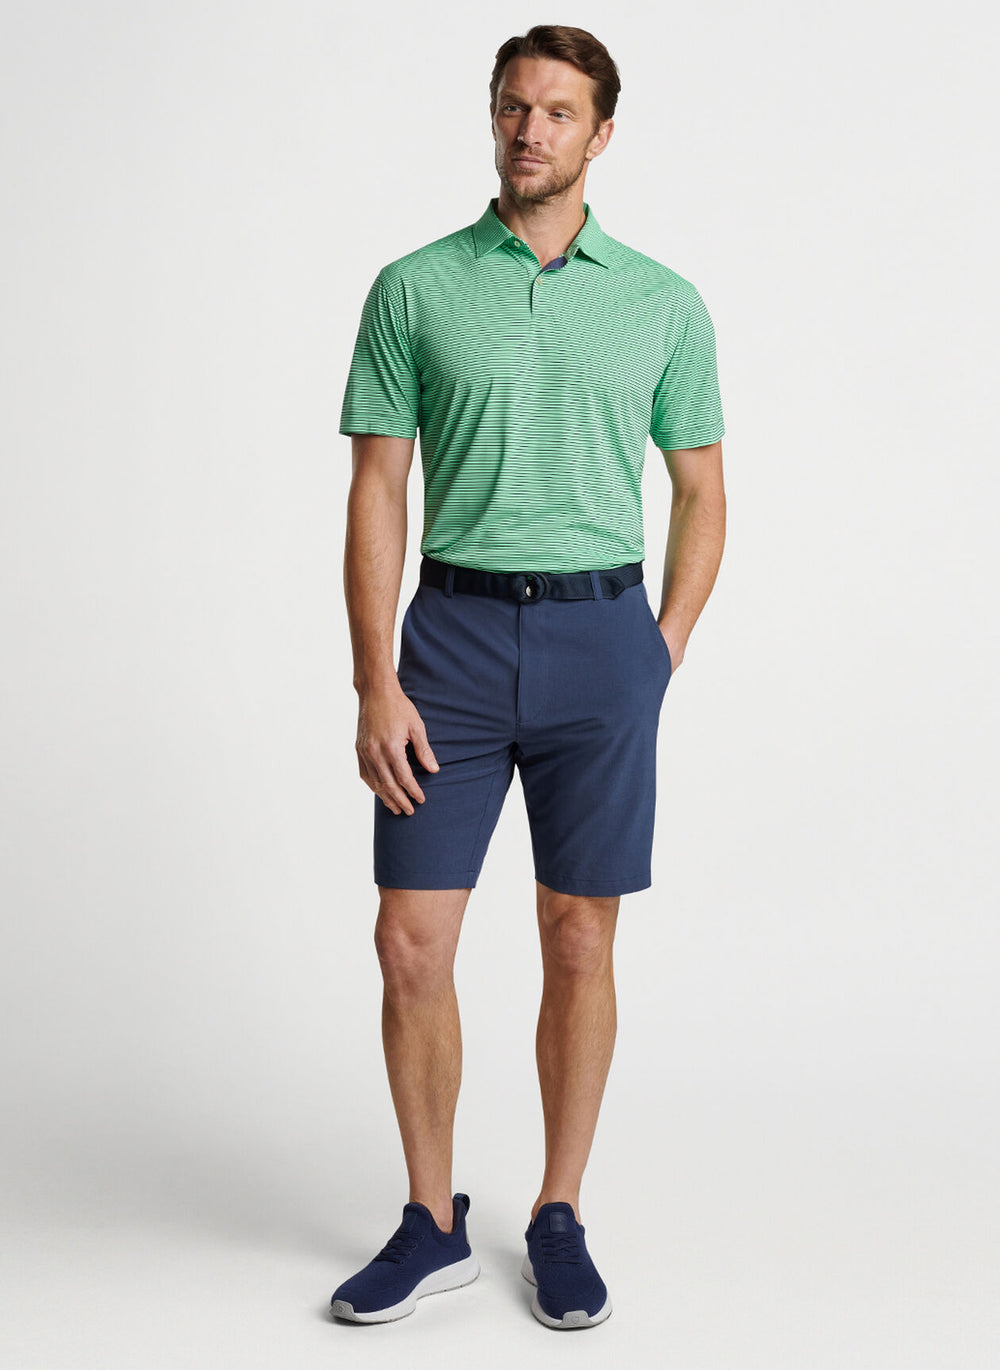 Peter Millar Featherweight Performance Stripe Polo In Summer Meadow